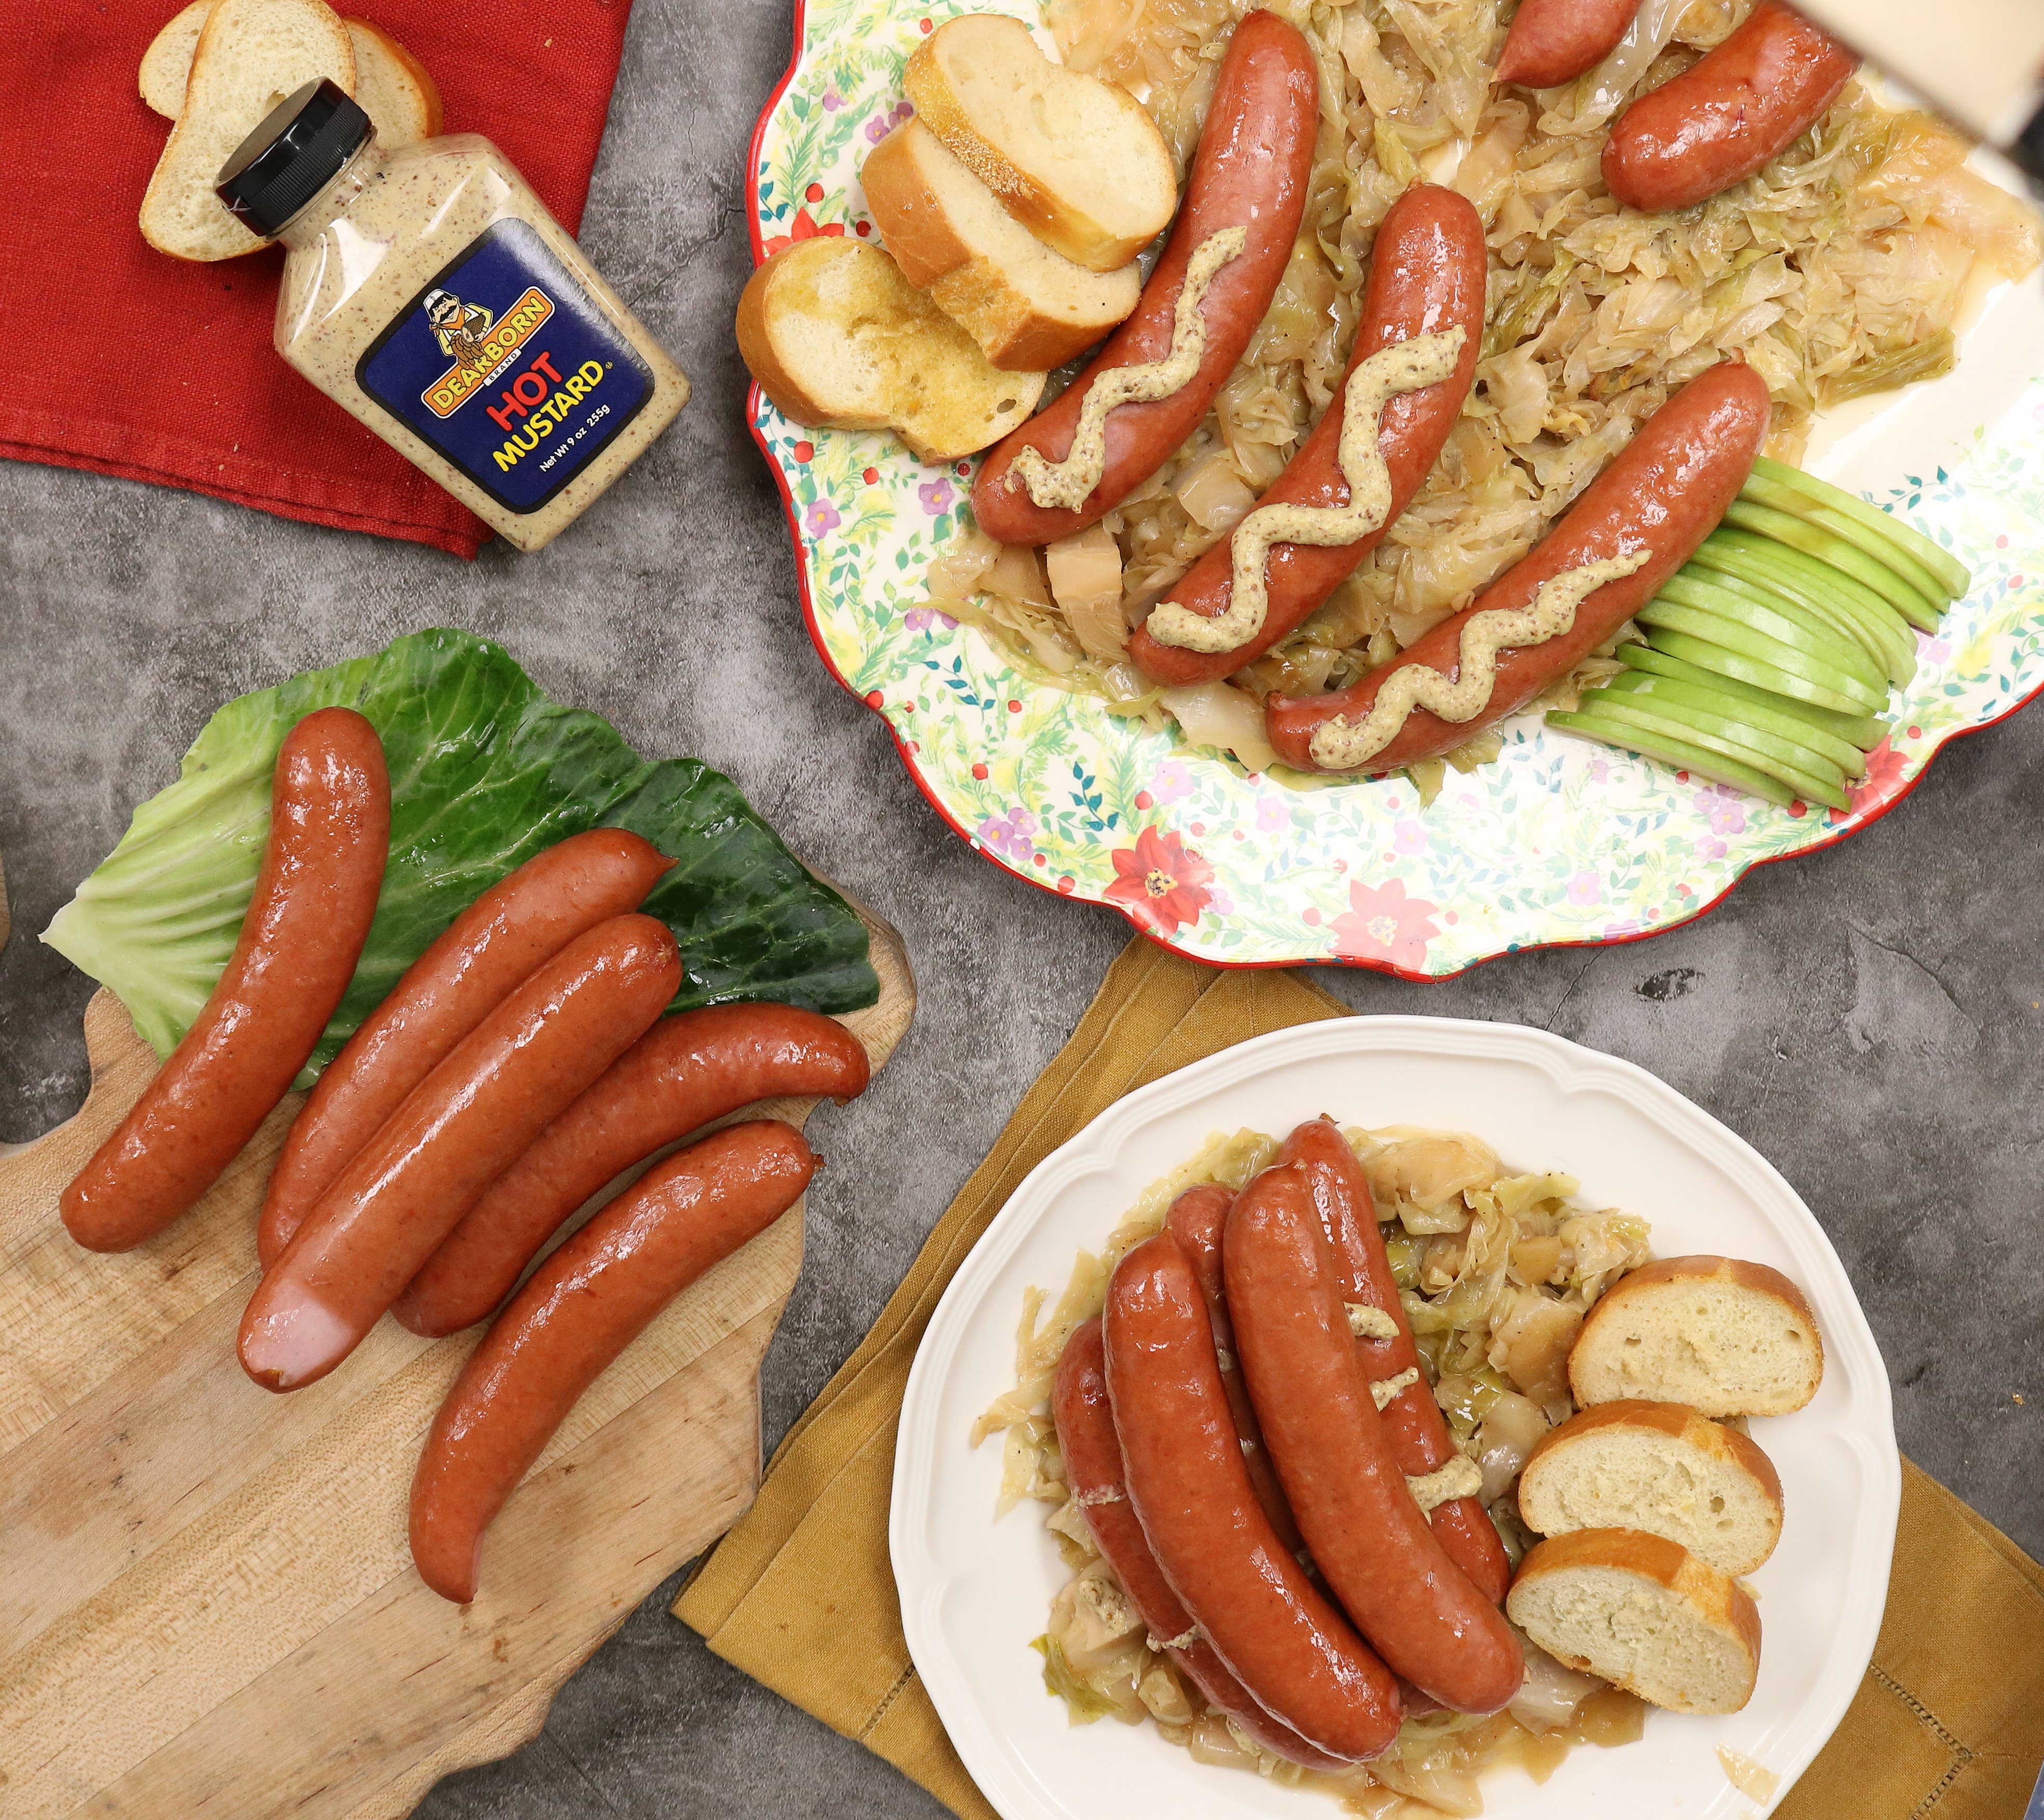 German_Knockwurst_with_Braised_Cabbage